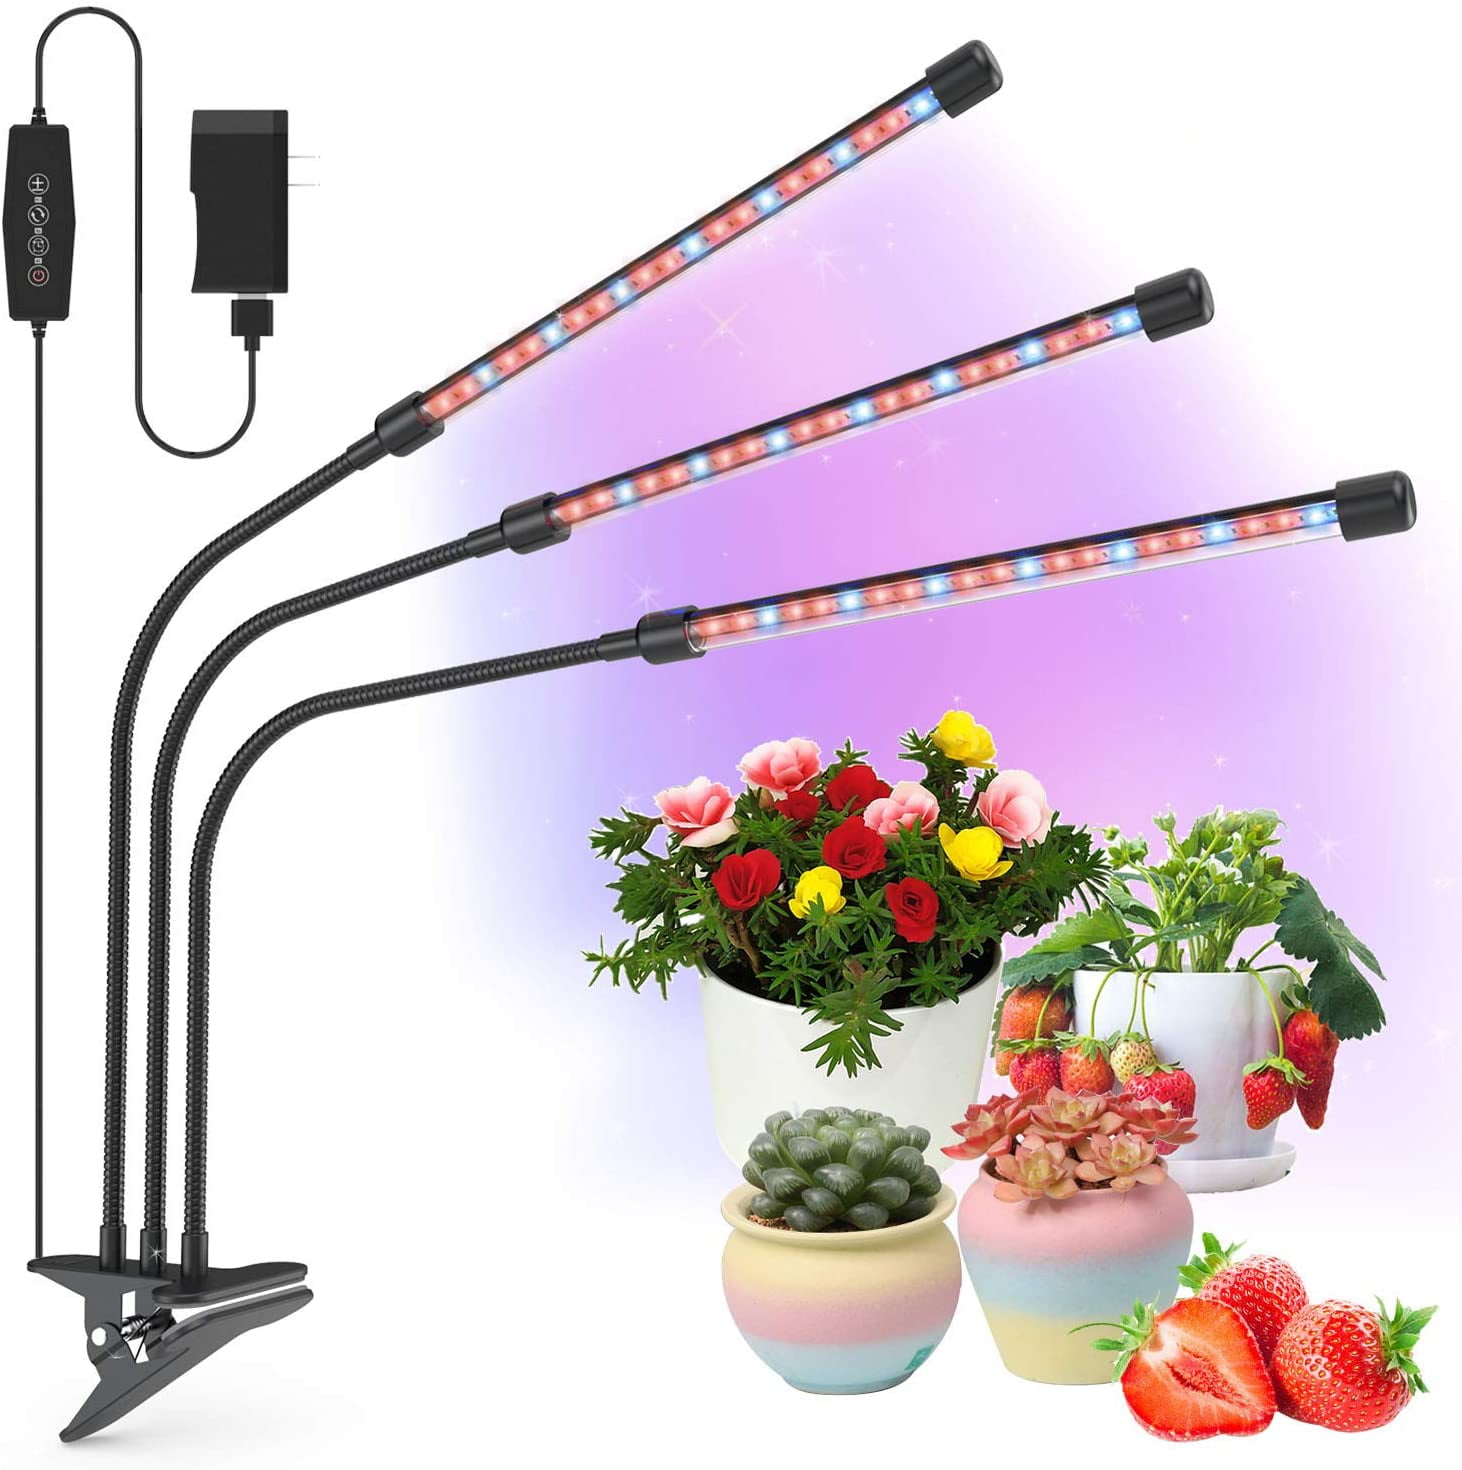 LED Grow Light with Adjustable Tripod RHM Four-Head Grow Lights for Indoor Plant with Cycle Timer/Remote Control/Red Blue & Mixed Spectrum/4 Lighting Modes/10 Level Dimming